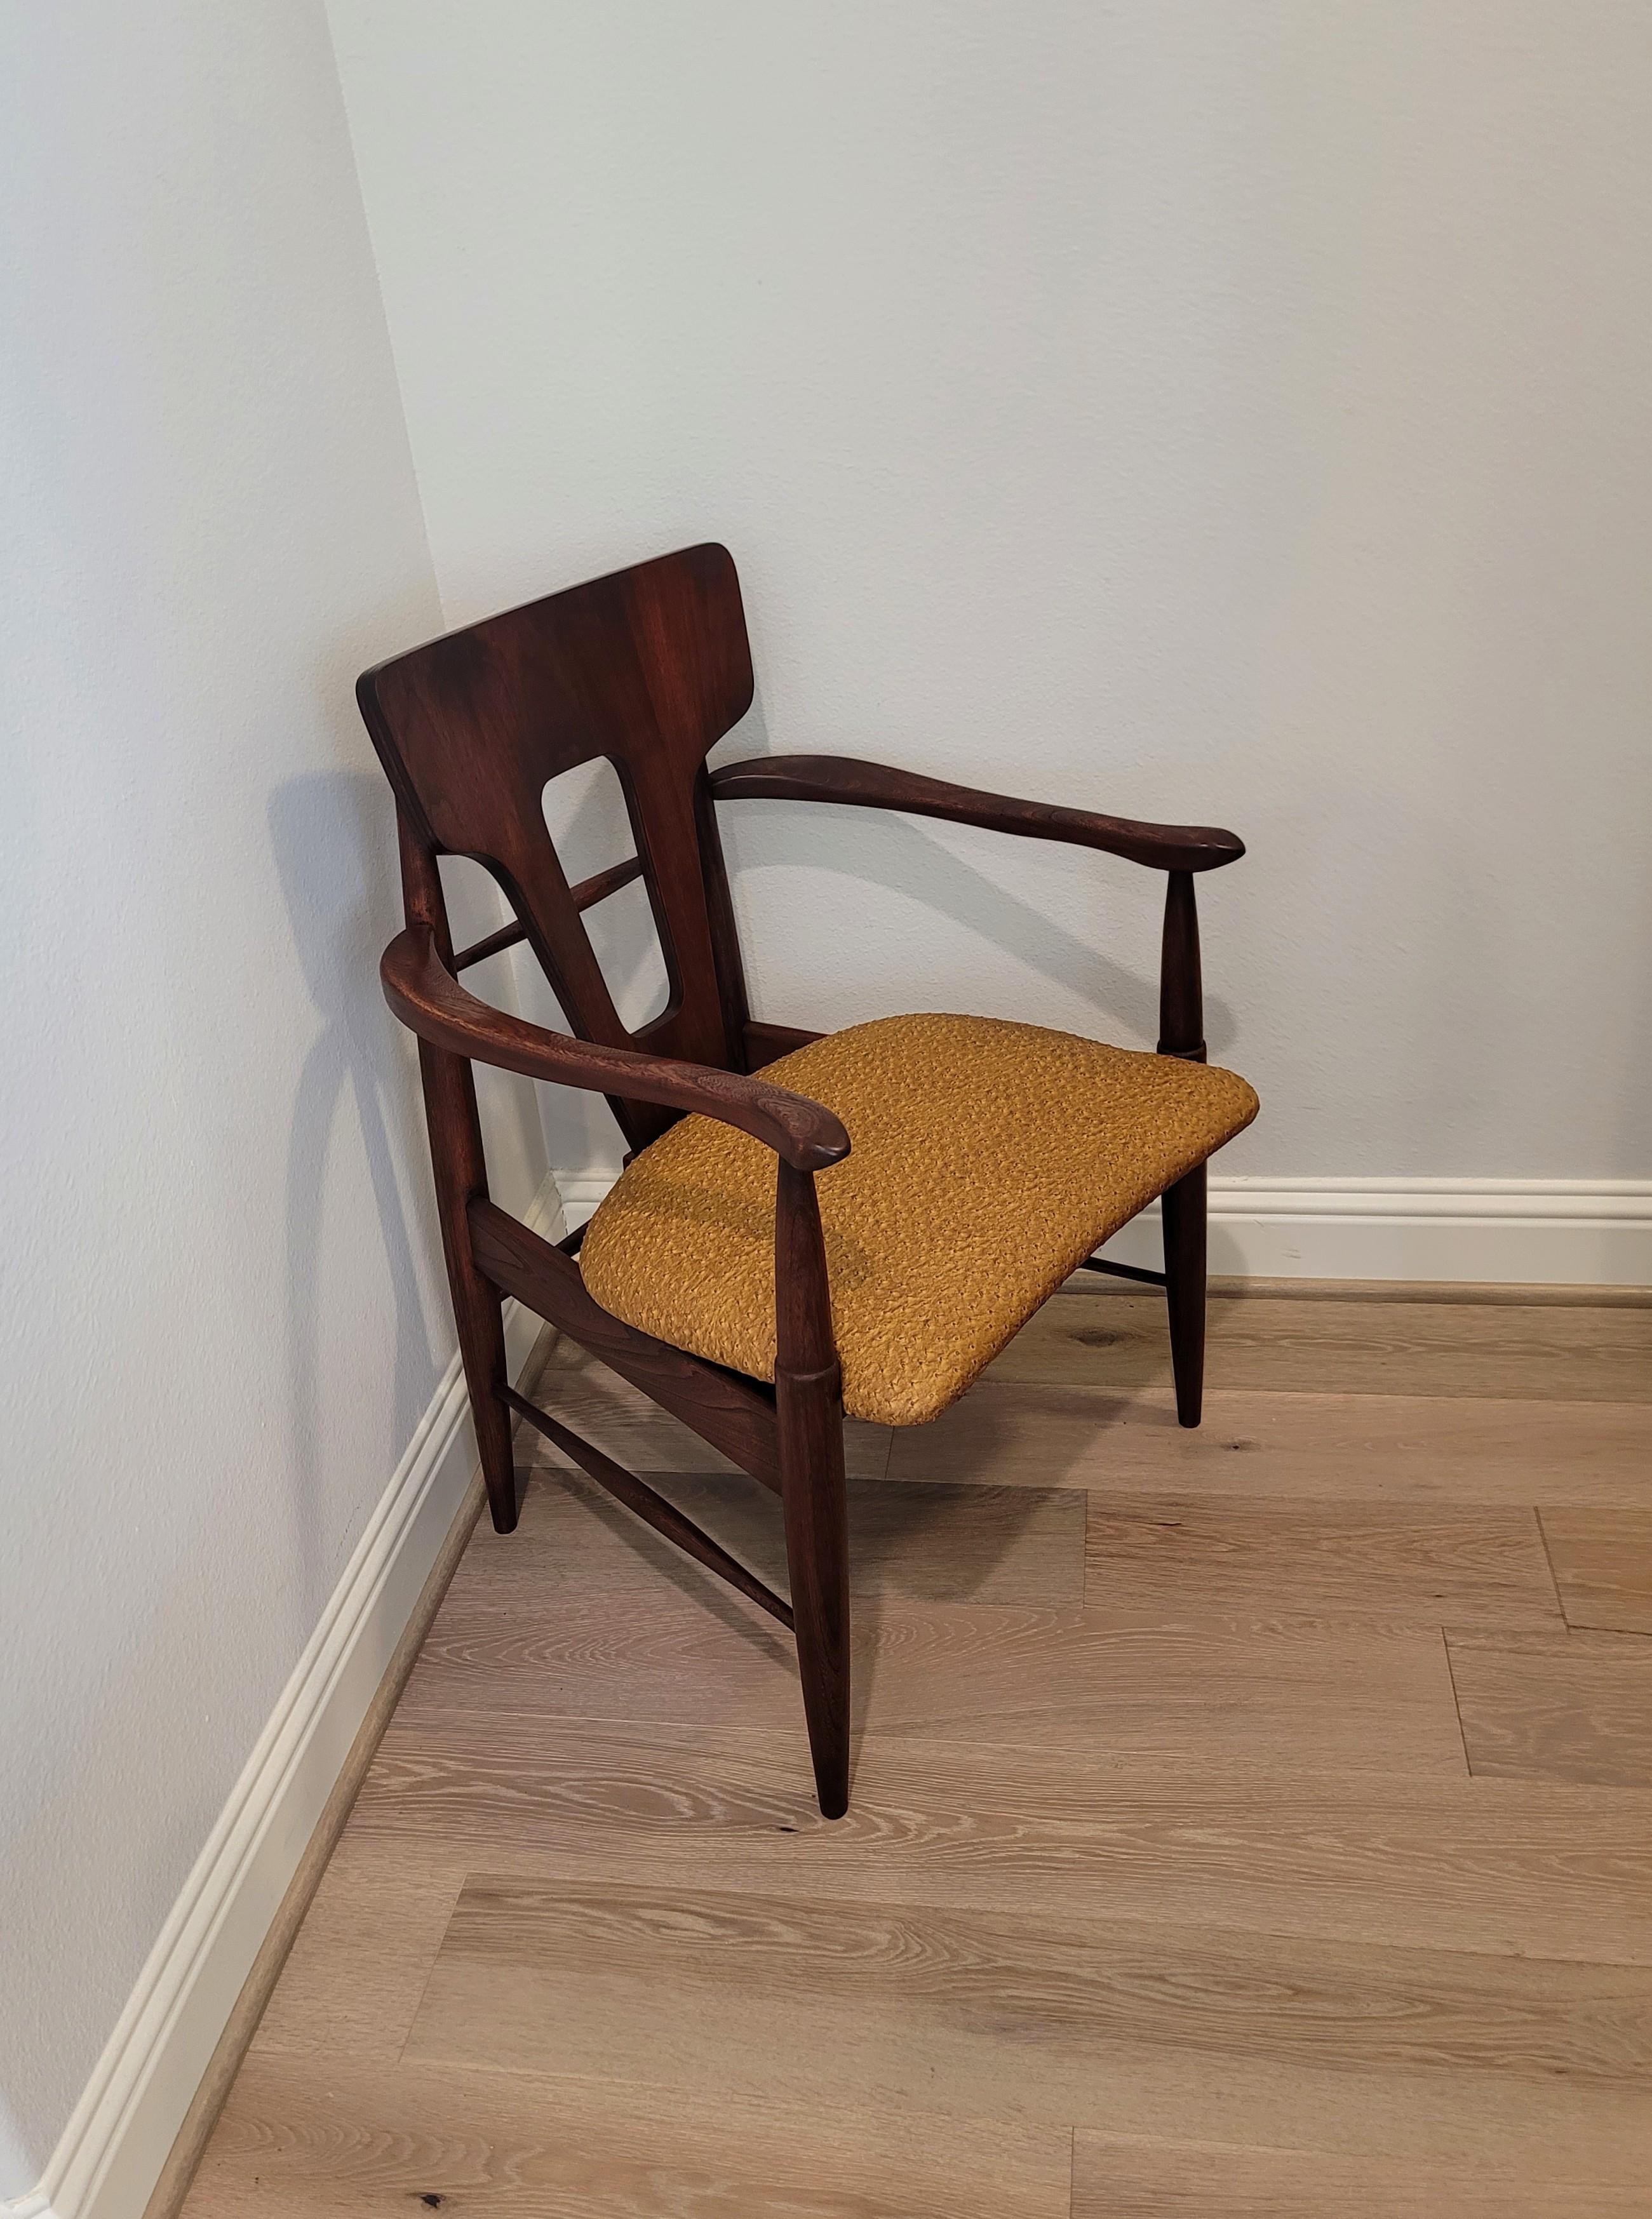 A fabulous 1960s Mid-Century Modern sculptural armchair in dark teakwood and tan ostrich upholstery. 

A bit wider and more substantial than typical Scandinavian Modern chairs, having a distinctive sculptural Silhouette that is both comfortable